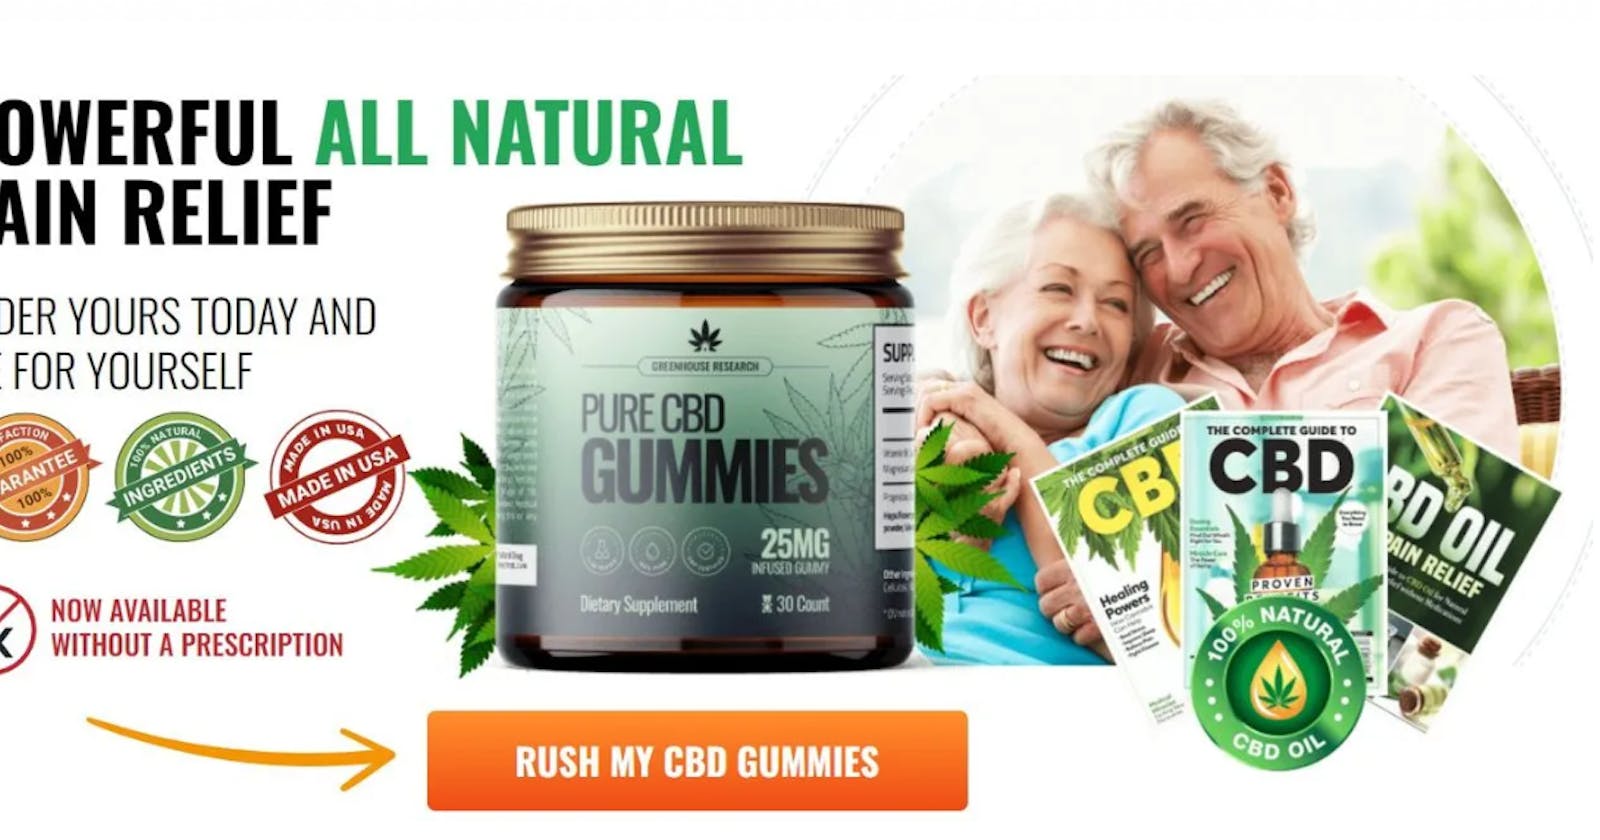 My Life CBD Gummies – Is it Safe? Get Rid Of Chronic Pain, Price & Where To Buy?